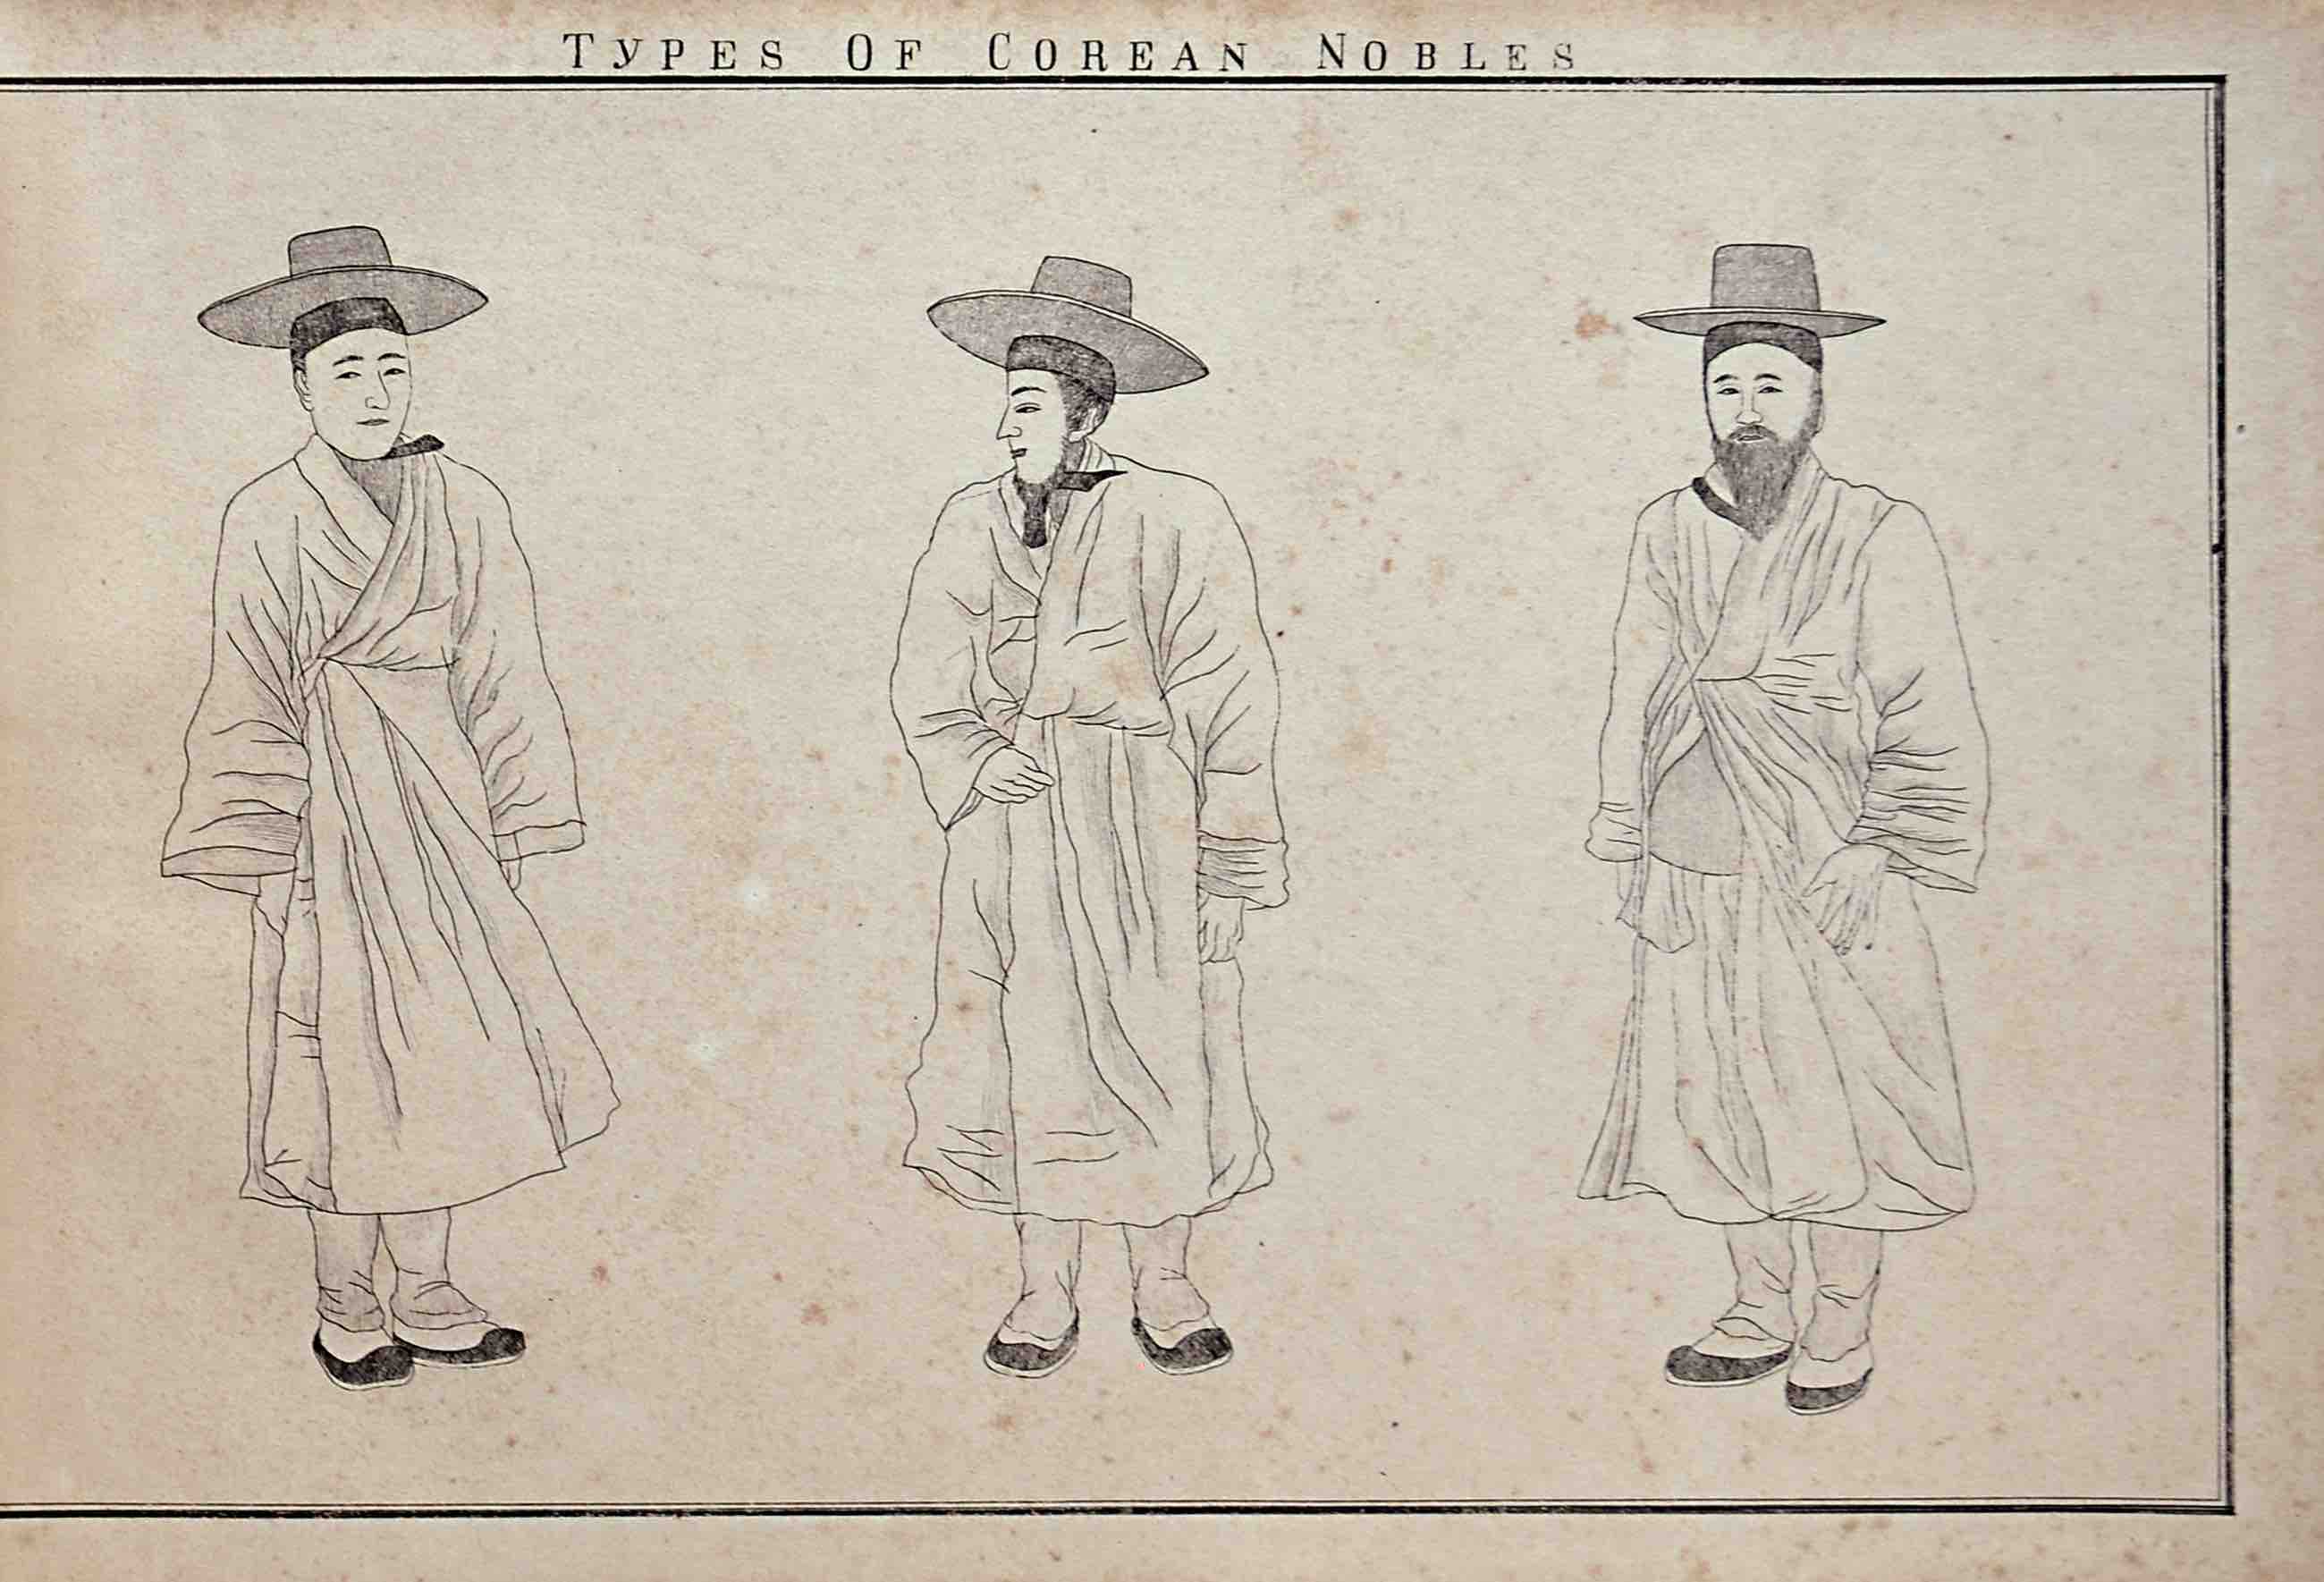 MCLEOD, NICHOLAS (or (NORMAN): - Korea and the Ten Lost Tribes of Israel, with Korean, Japanese and Israelitish Illustrations. Yokohama, Published for the Author partly at C. Levy and the Sei Shi Bunsha Co., 1879.